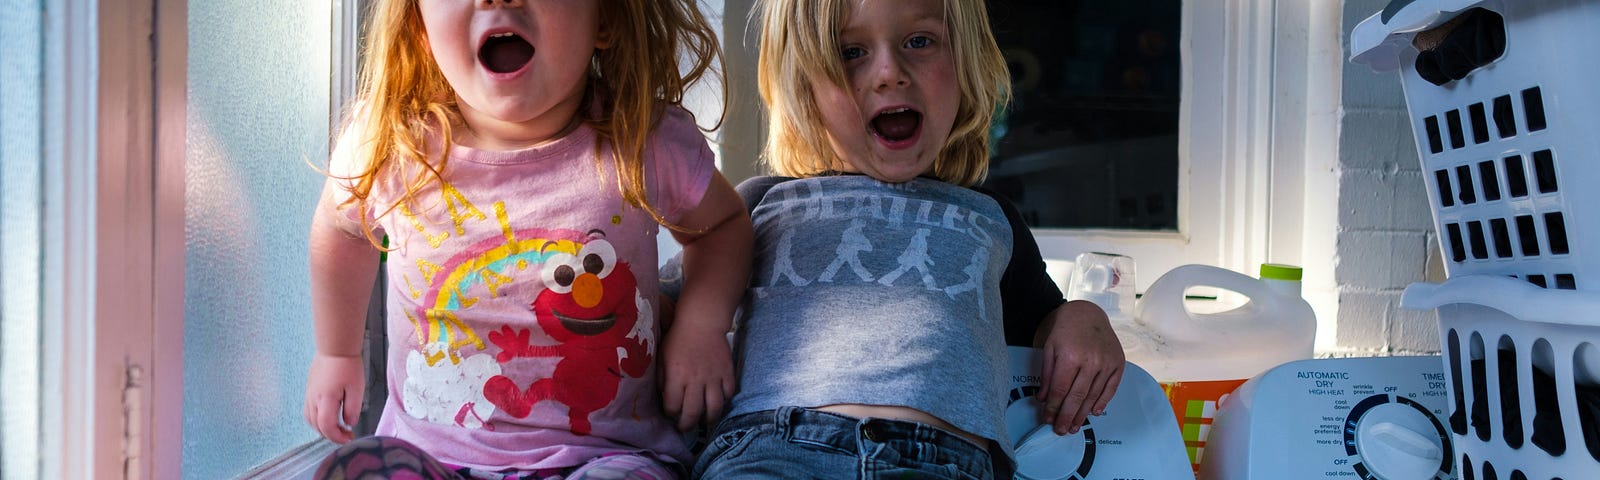 image of two young children sitting on a washing machine, making silly faces